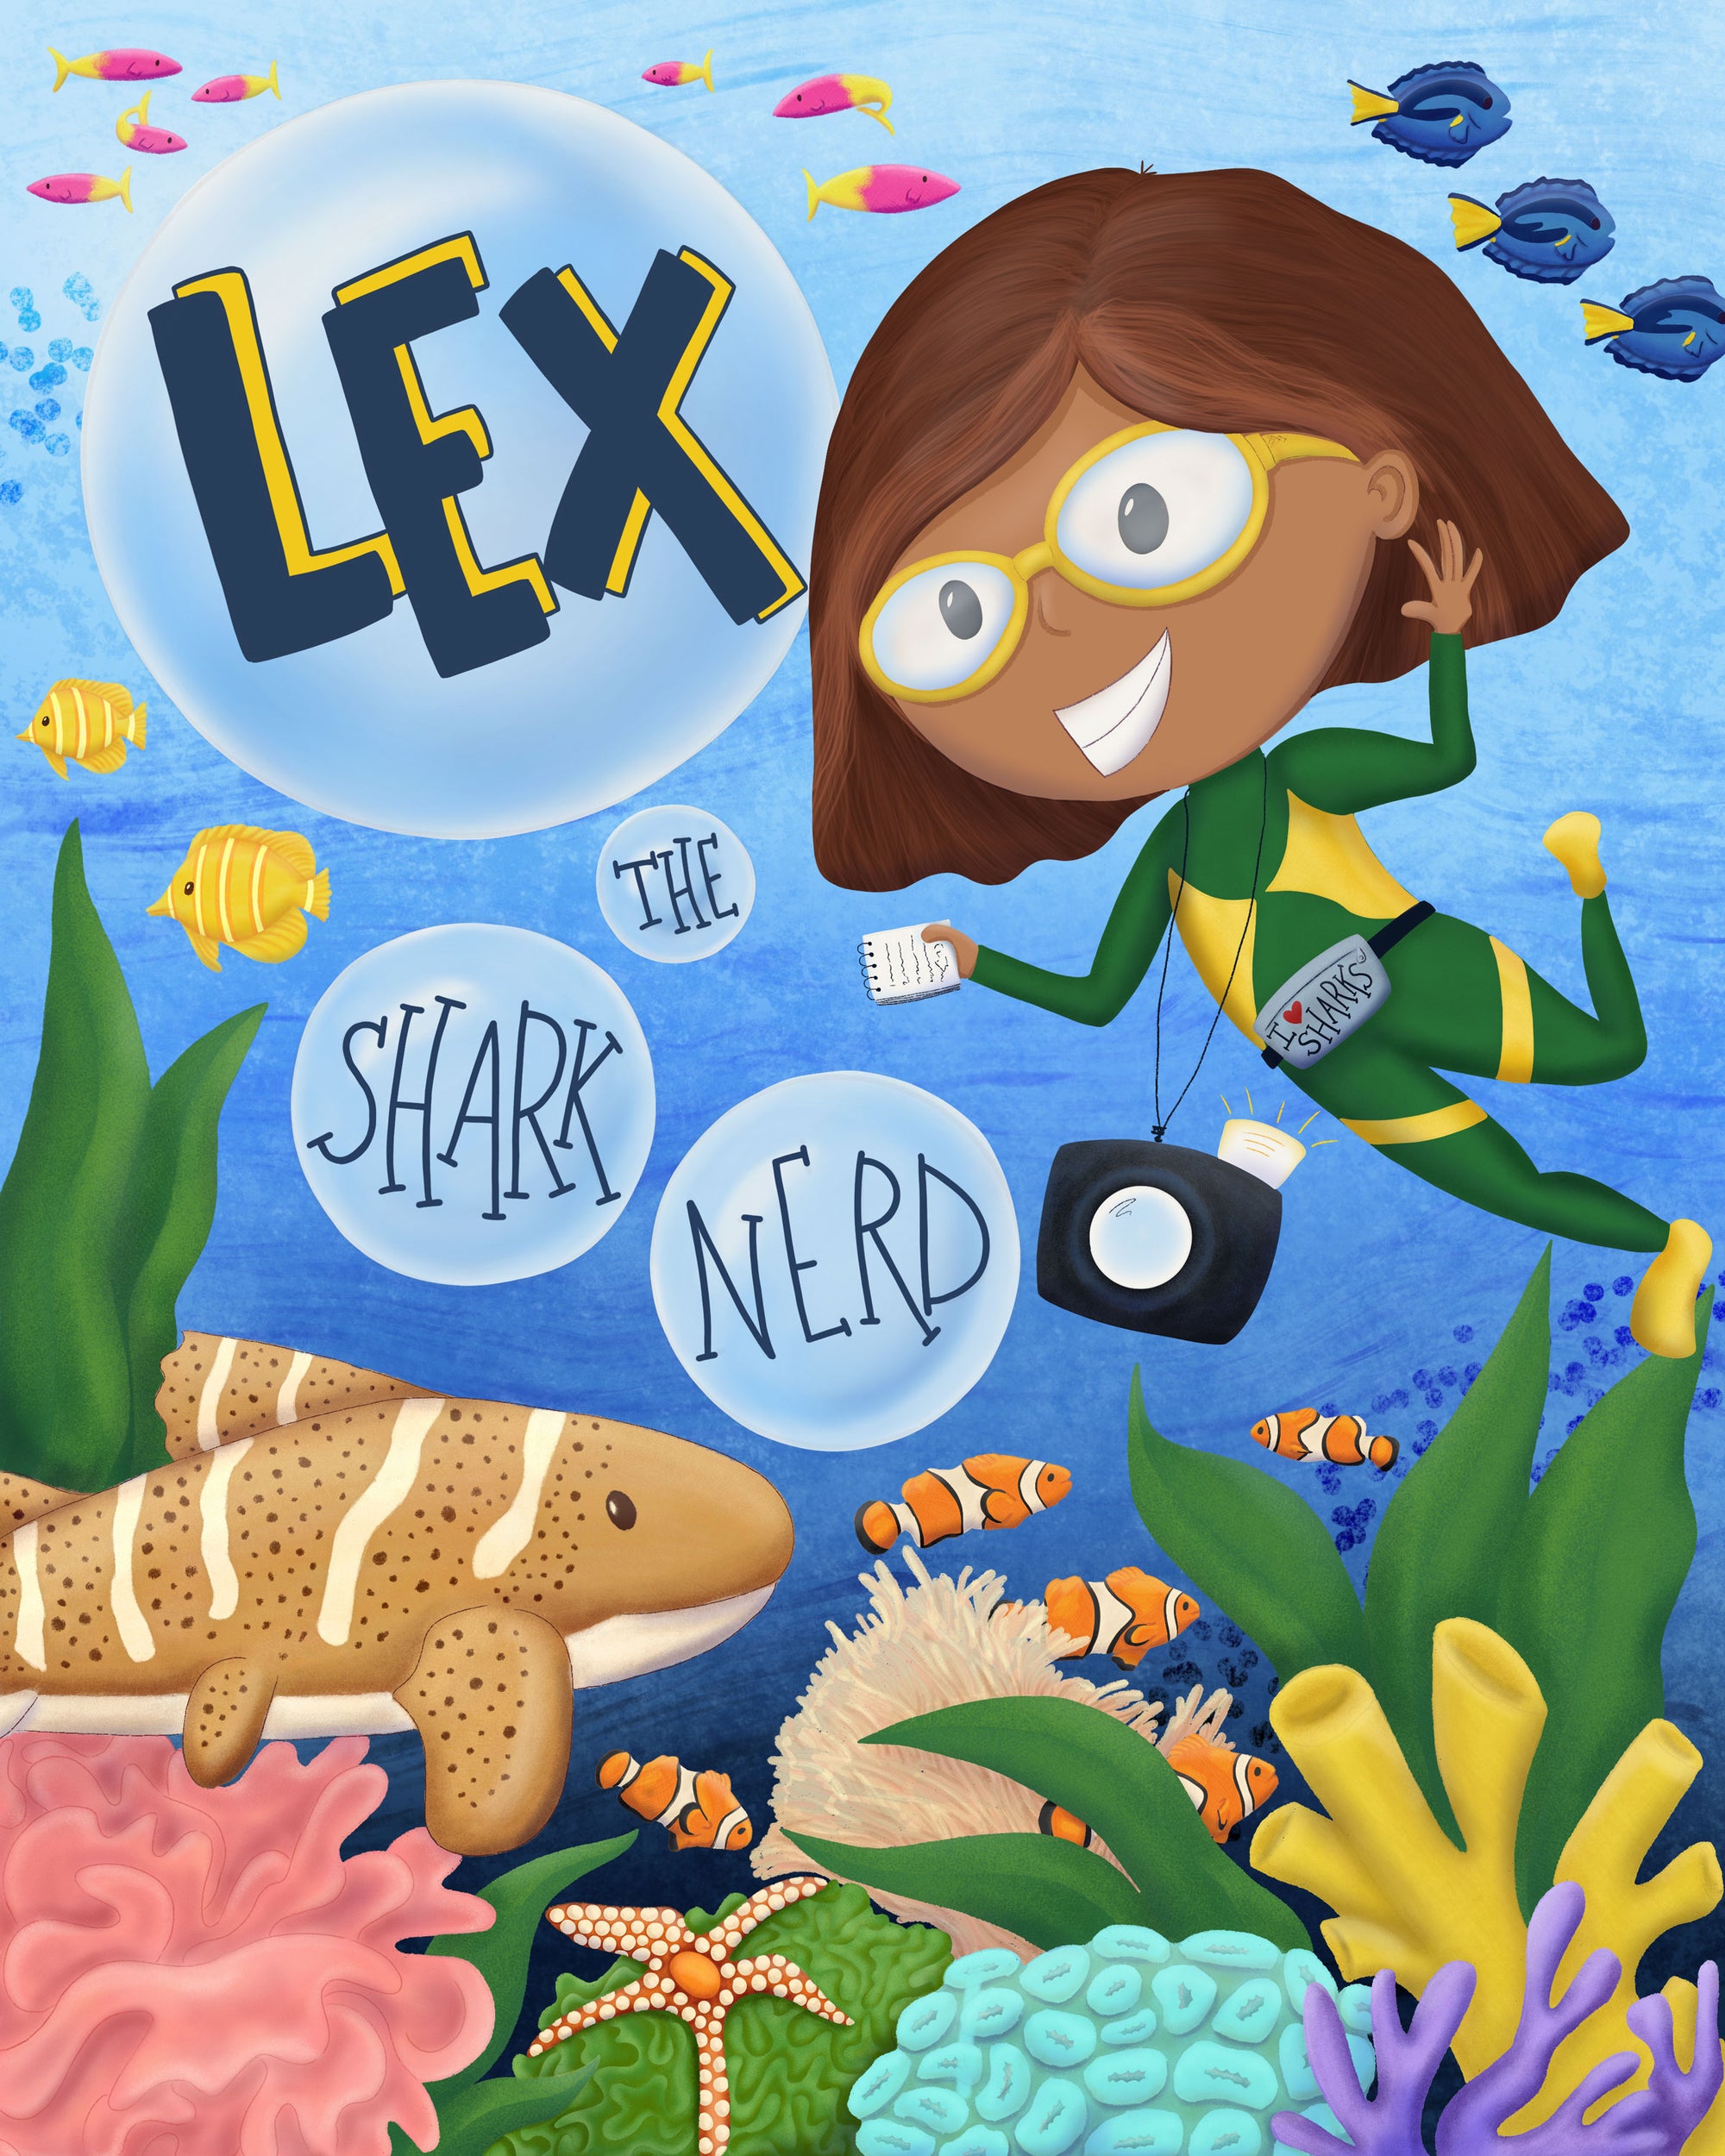 MATS Character Play Bootcamp Lex the Shark Nerd Children's Book Cover Illustration by Kelly Lollar